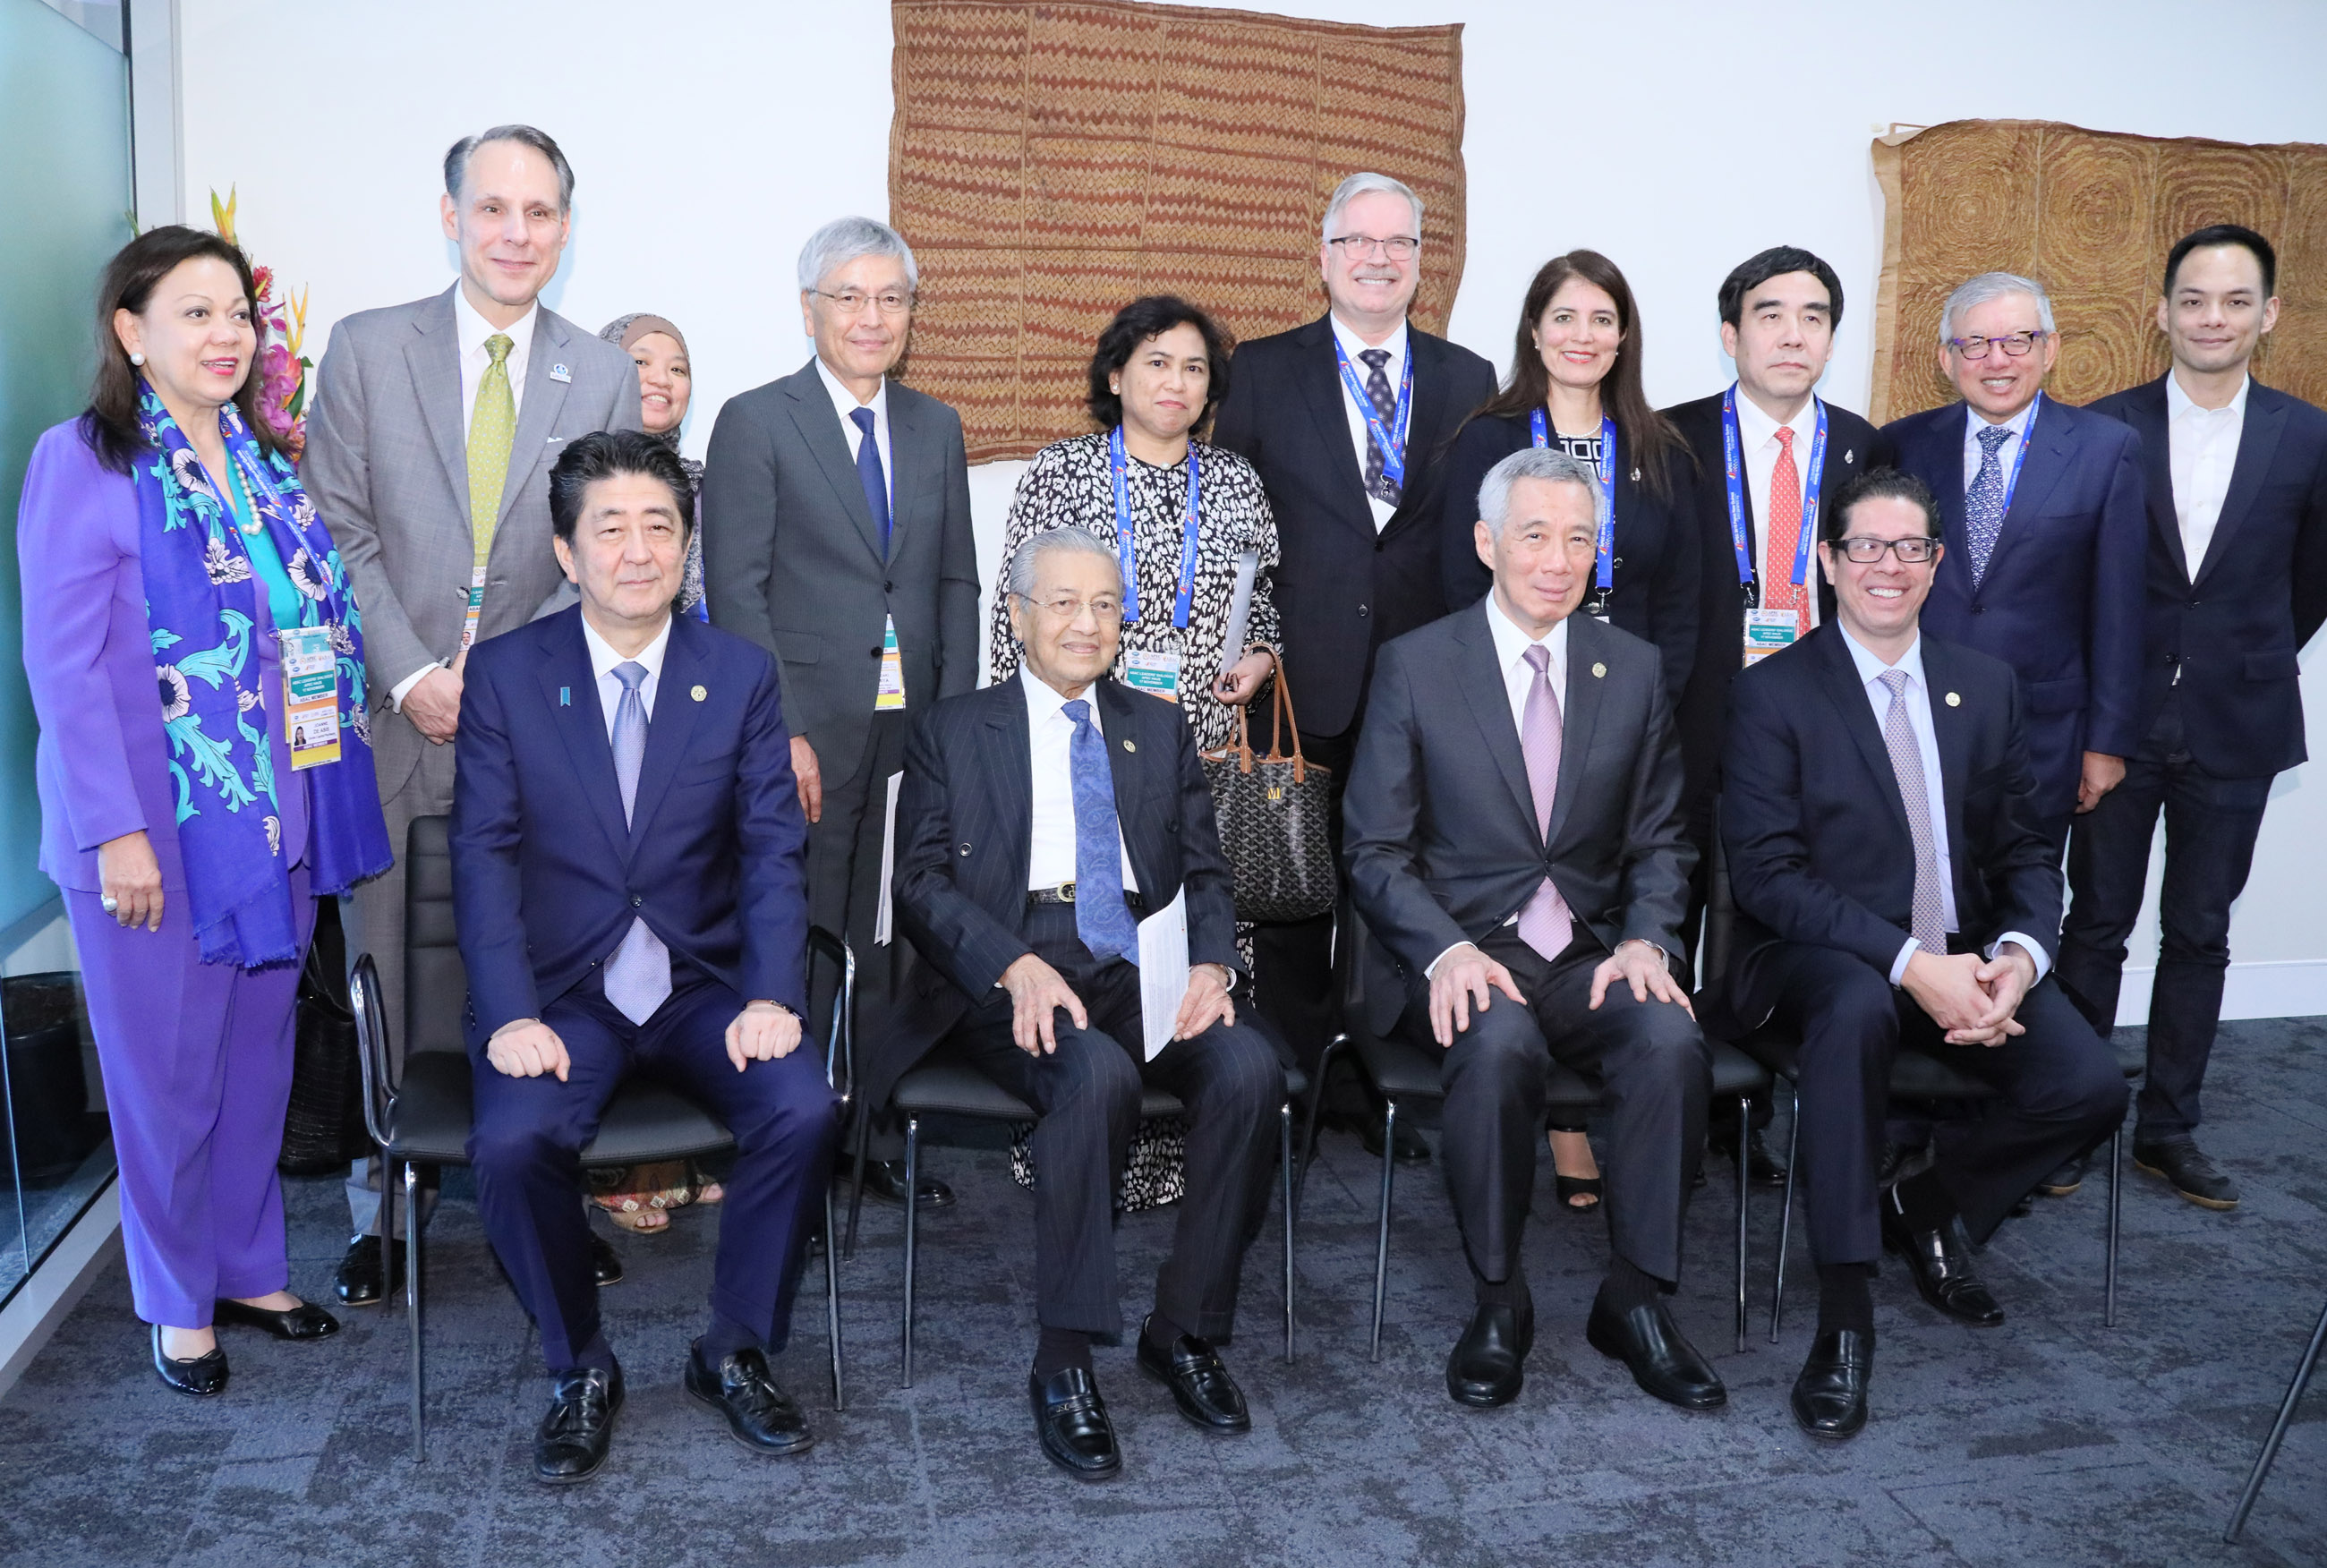 Photograph of the ABAC Dialogue with APEC Leaders